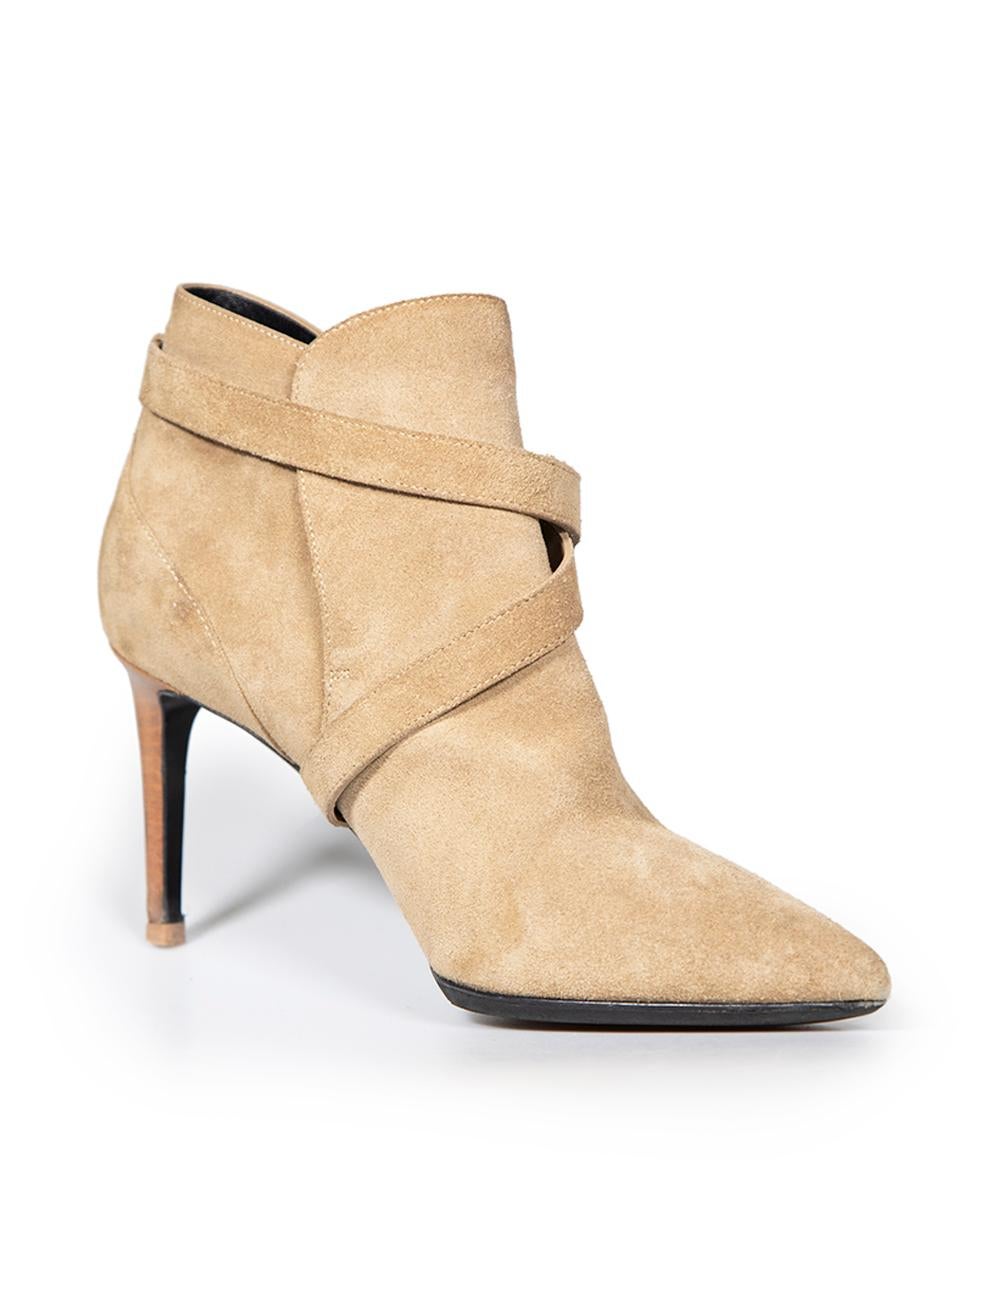 CONDITION is Good. Minor wear to boots is evident. Light wear to the heels and toes of both boots and both sides of the left boot with marks and abrasions to the suede on this used Saint Laurent designer resale item.
 
 
 
 Details
 
 
 Brown
 
